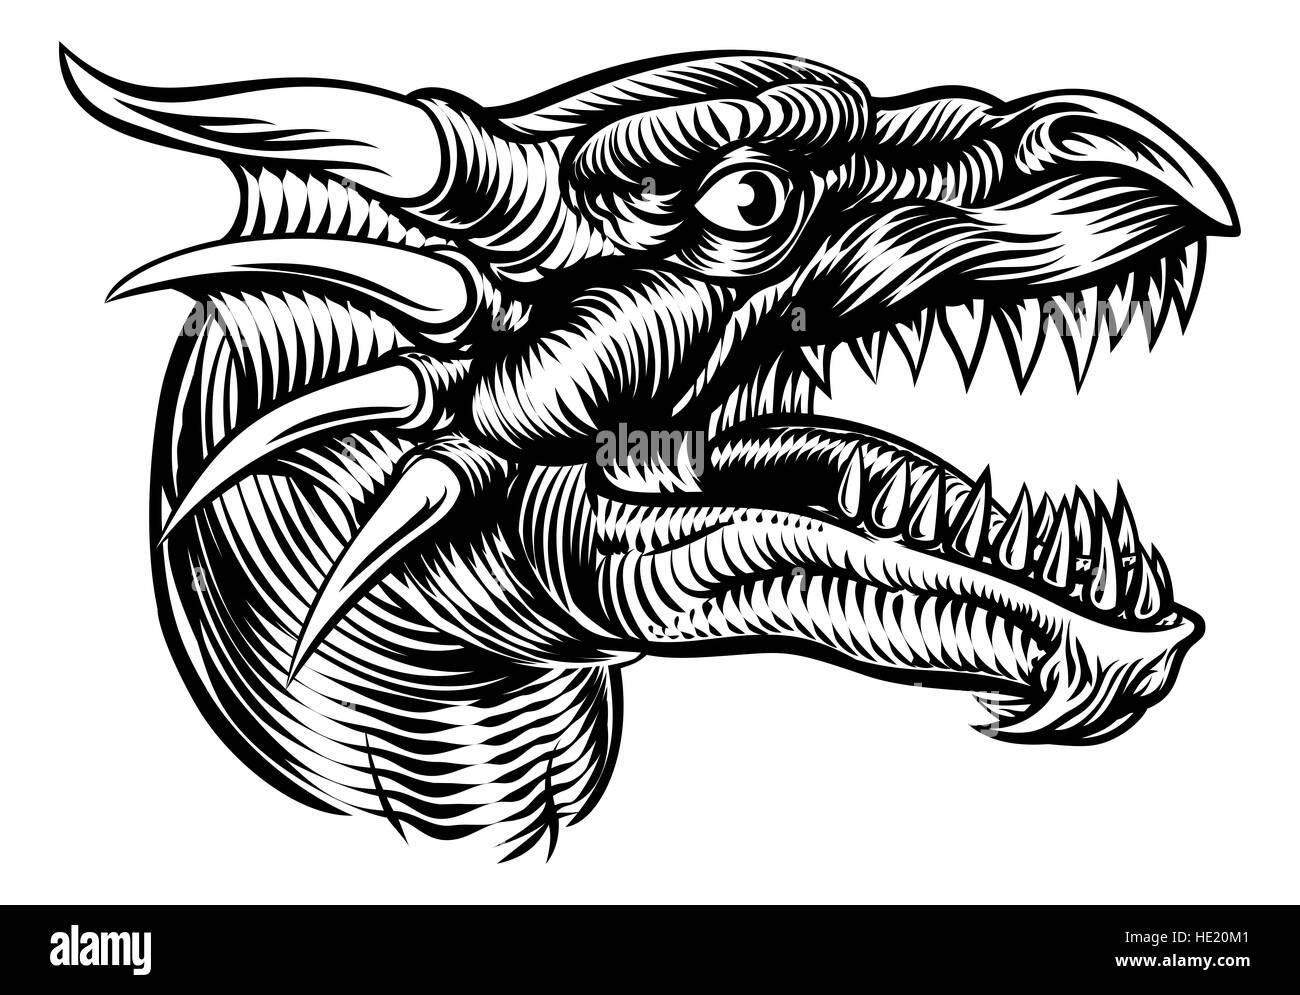 Original illustration of a monster dragon head in a vintage retro woodcut style Stock Photo